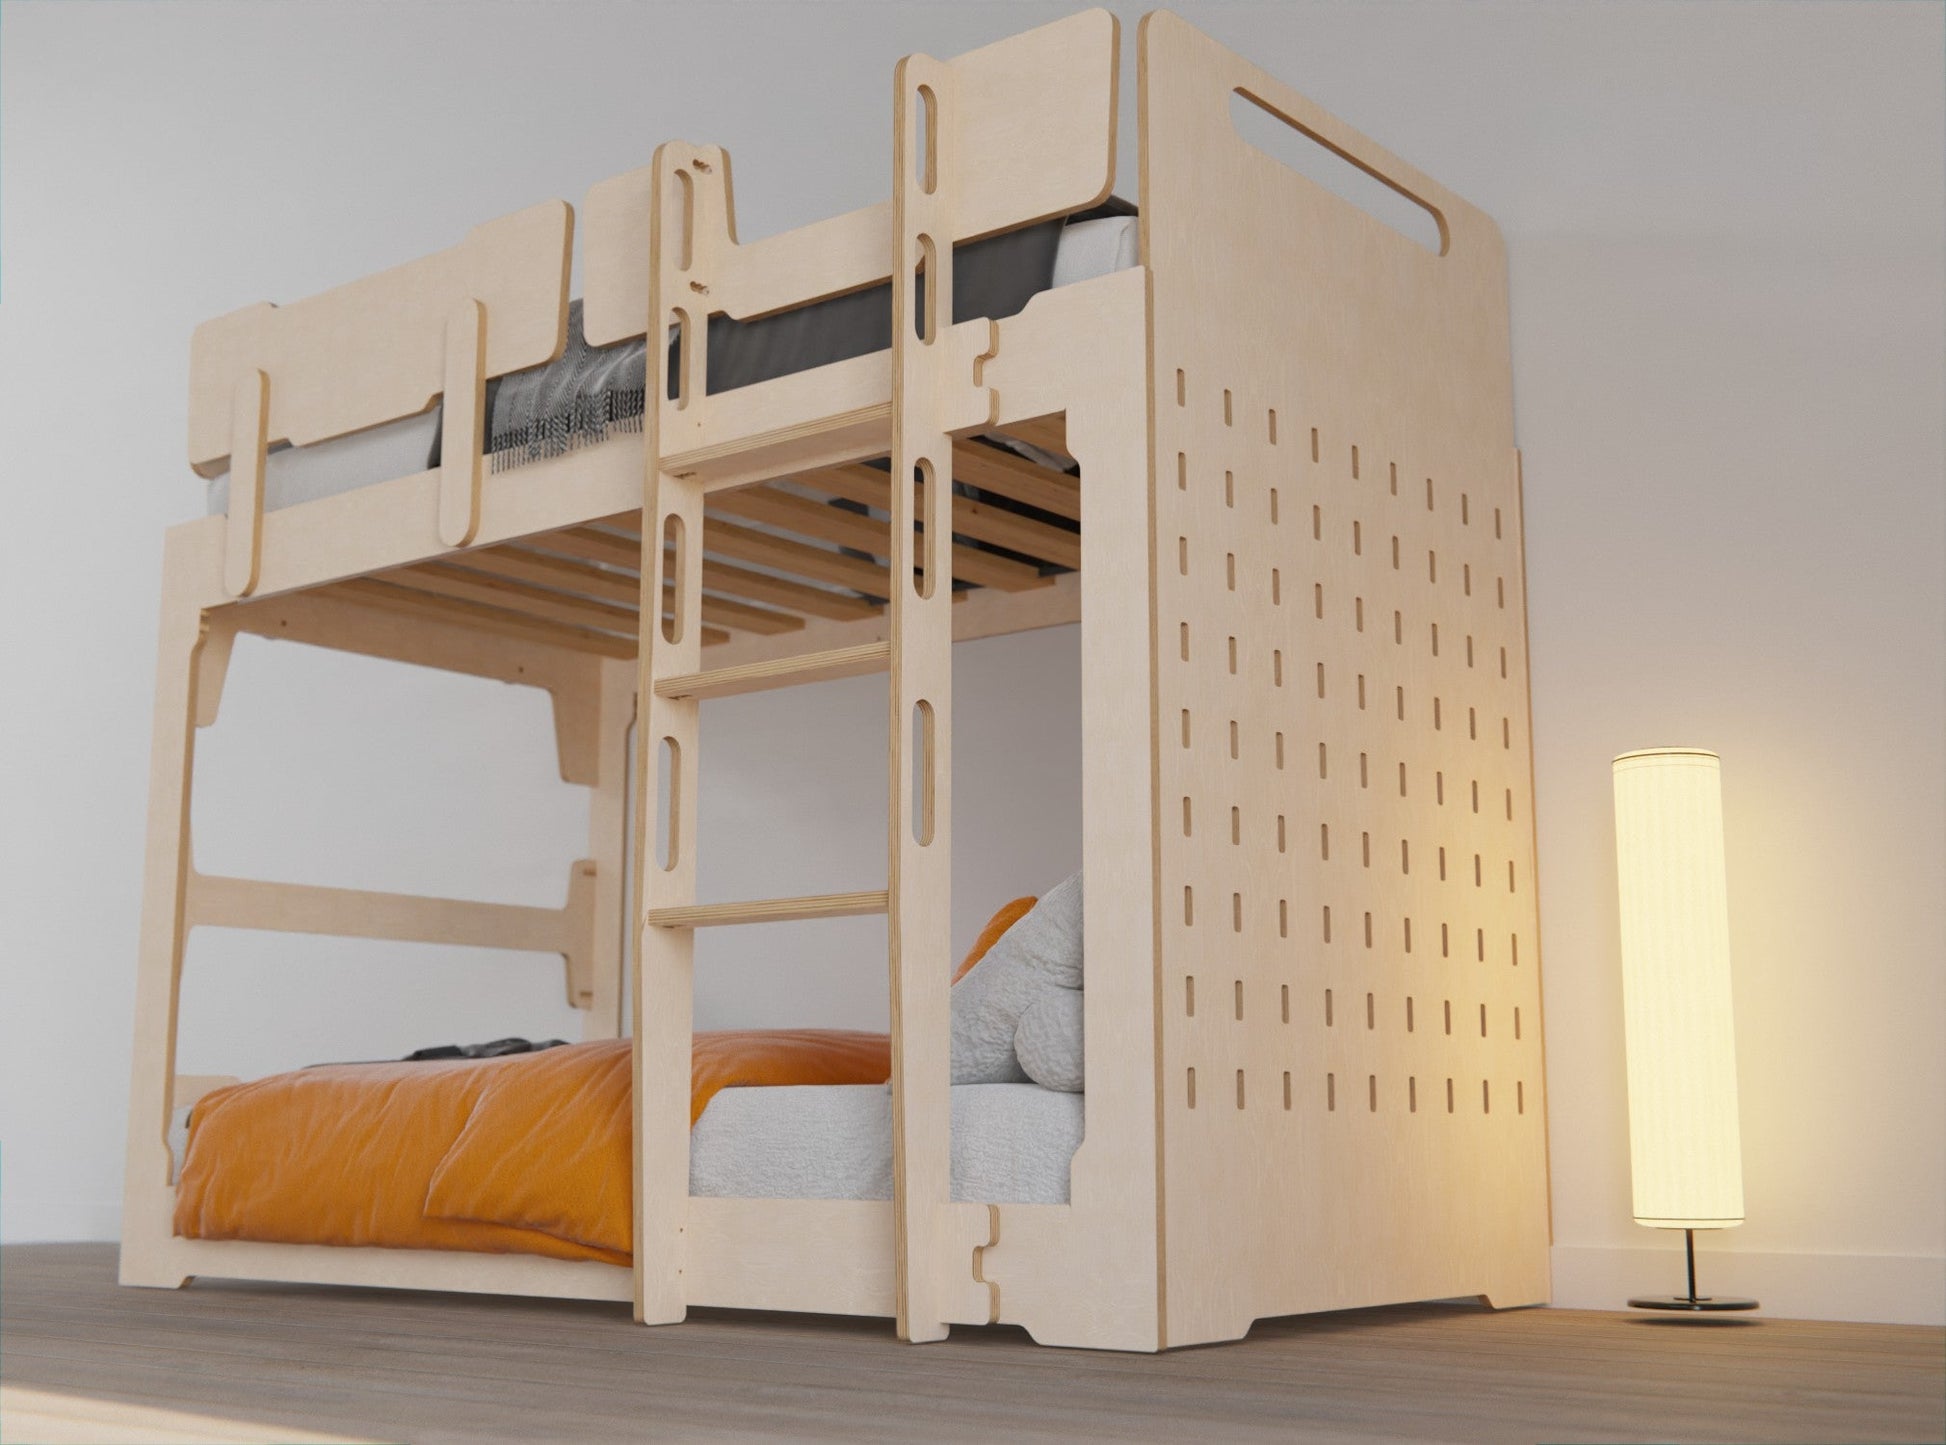 Optimize your space with the Transformer Bunk Bed: 3-in-1 design that adapts to your needs.